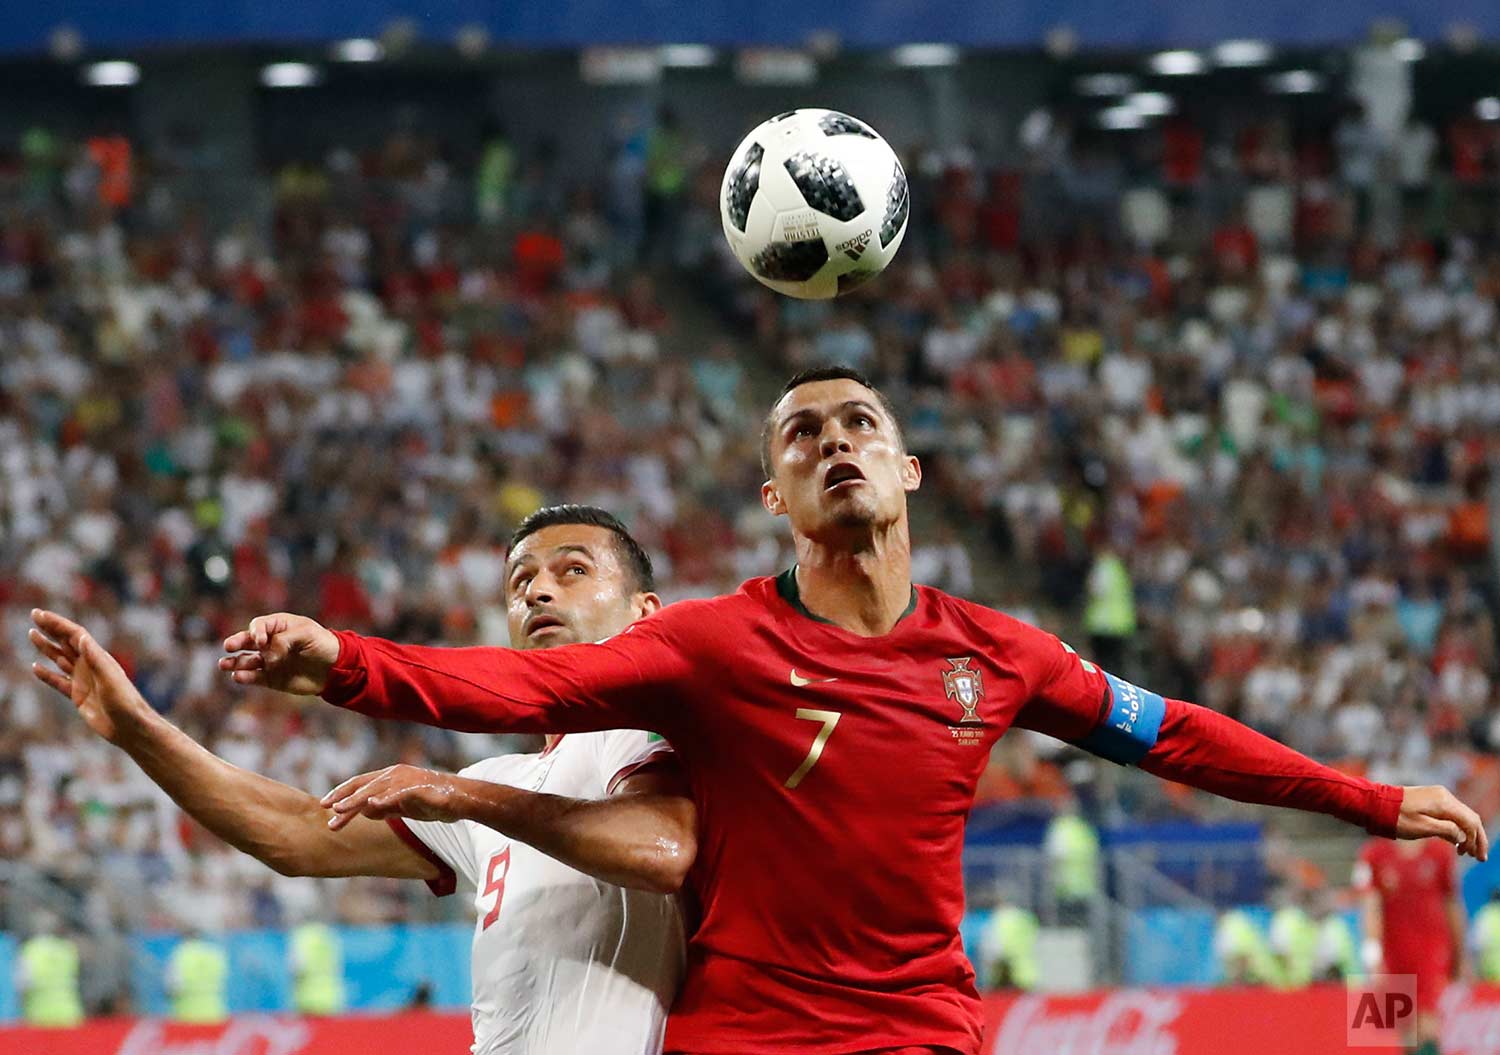  Portugal's Cristiano Ronaldo, right, and Iran's Omid Ebrahimi challenge for the ball during the group B match between Iran and Portugal at the 2018 soccer World Cup at the Mordovia Arena in Saransk, Russia, Monday, June 25, 2018. (AP Photo/Pavel Gol